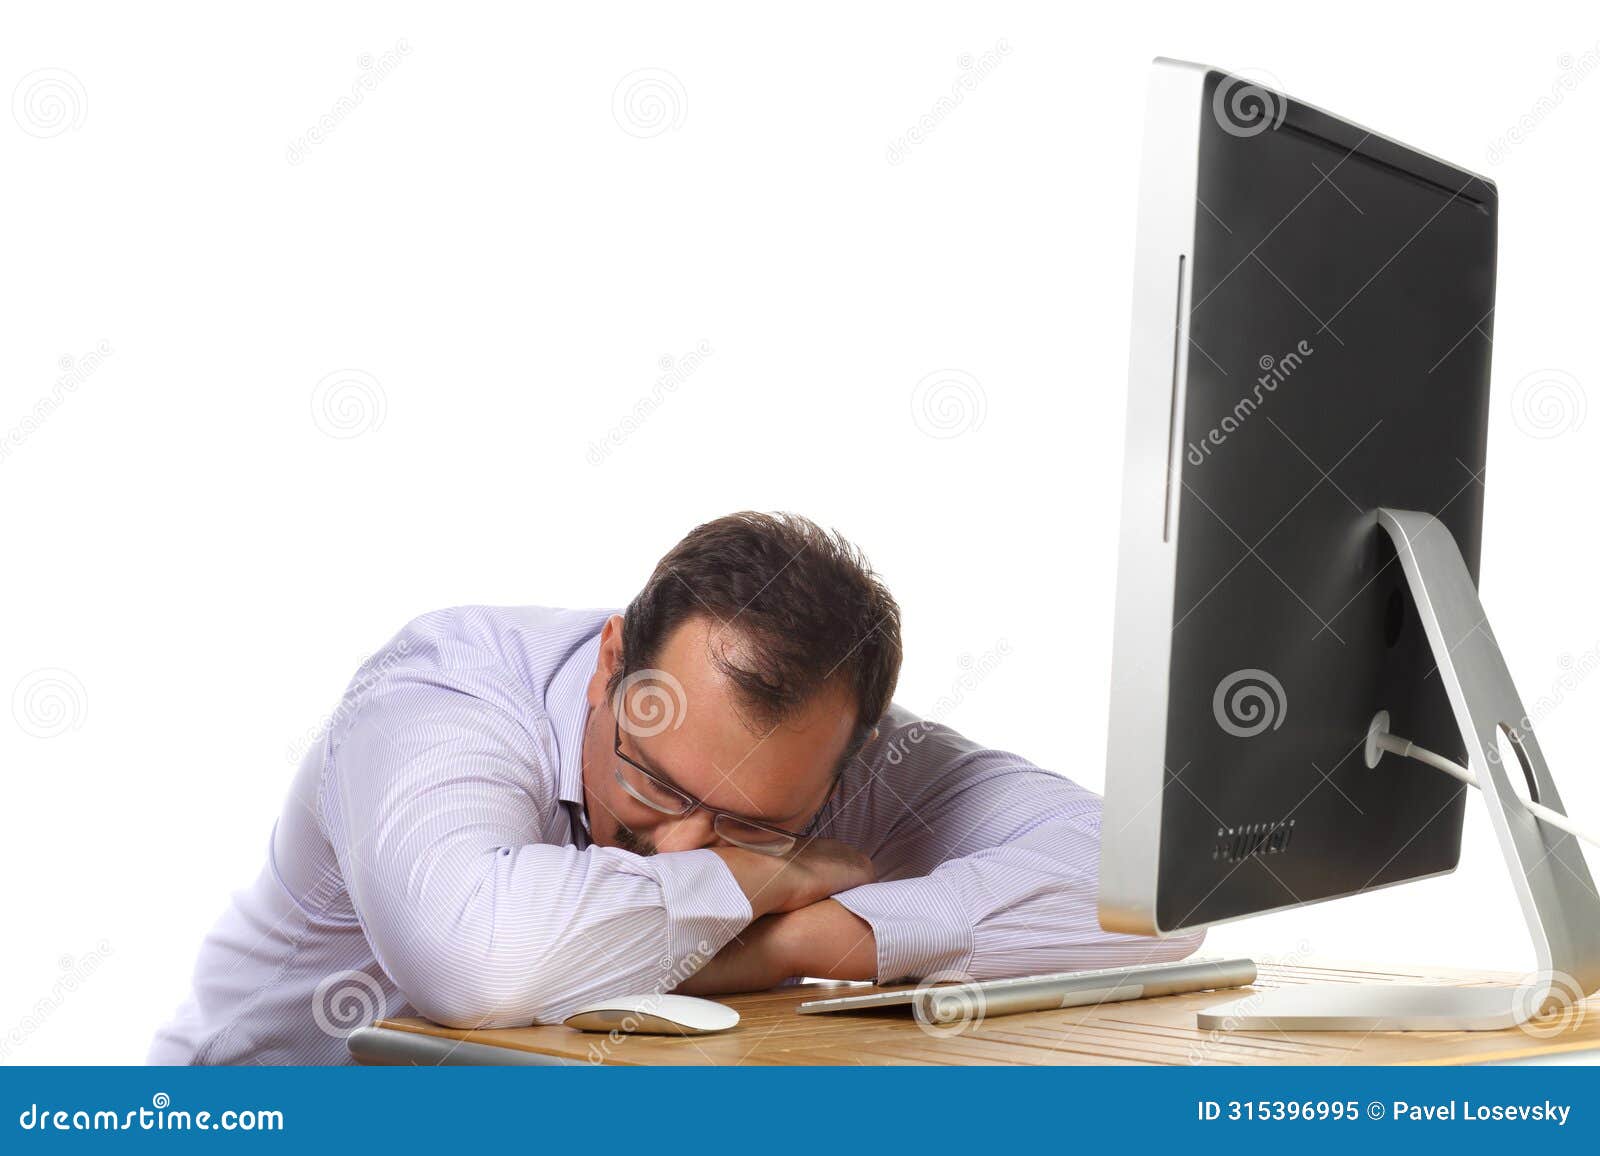 tired man asleep at desk with computer working